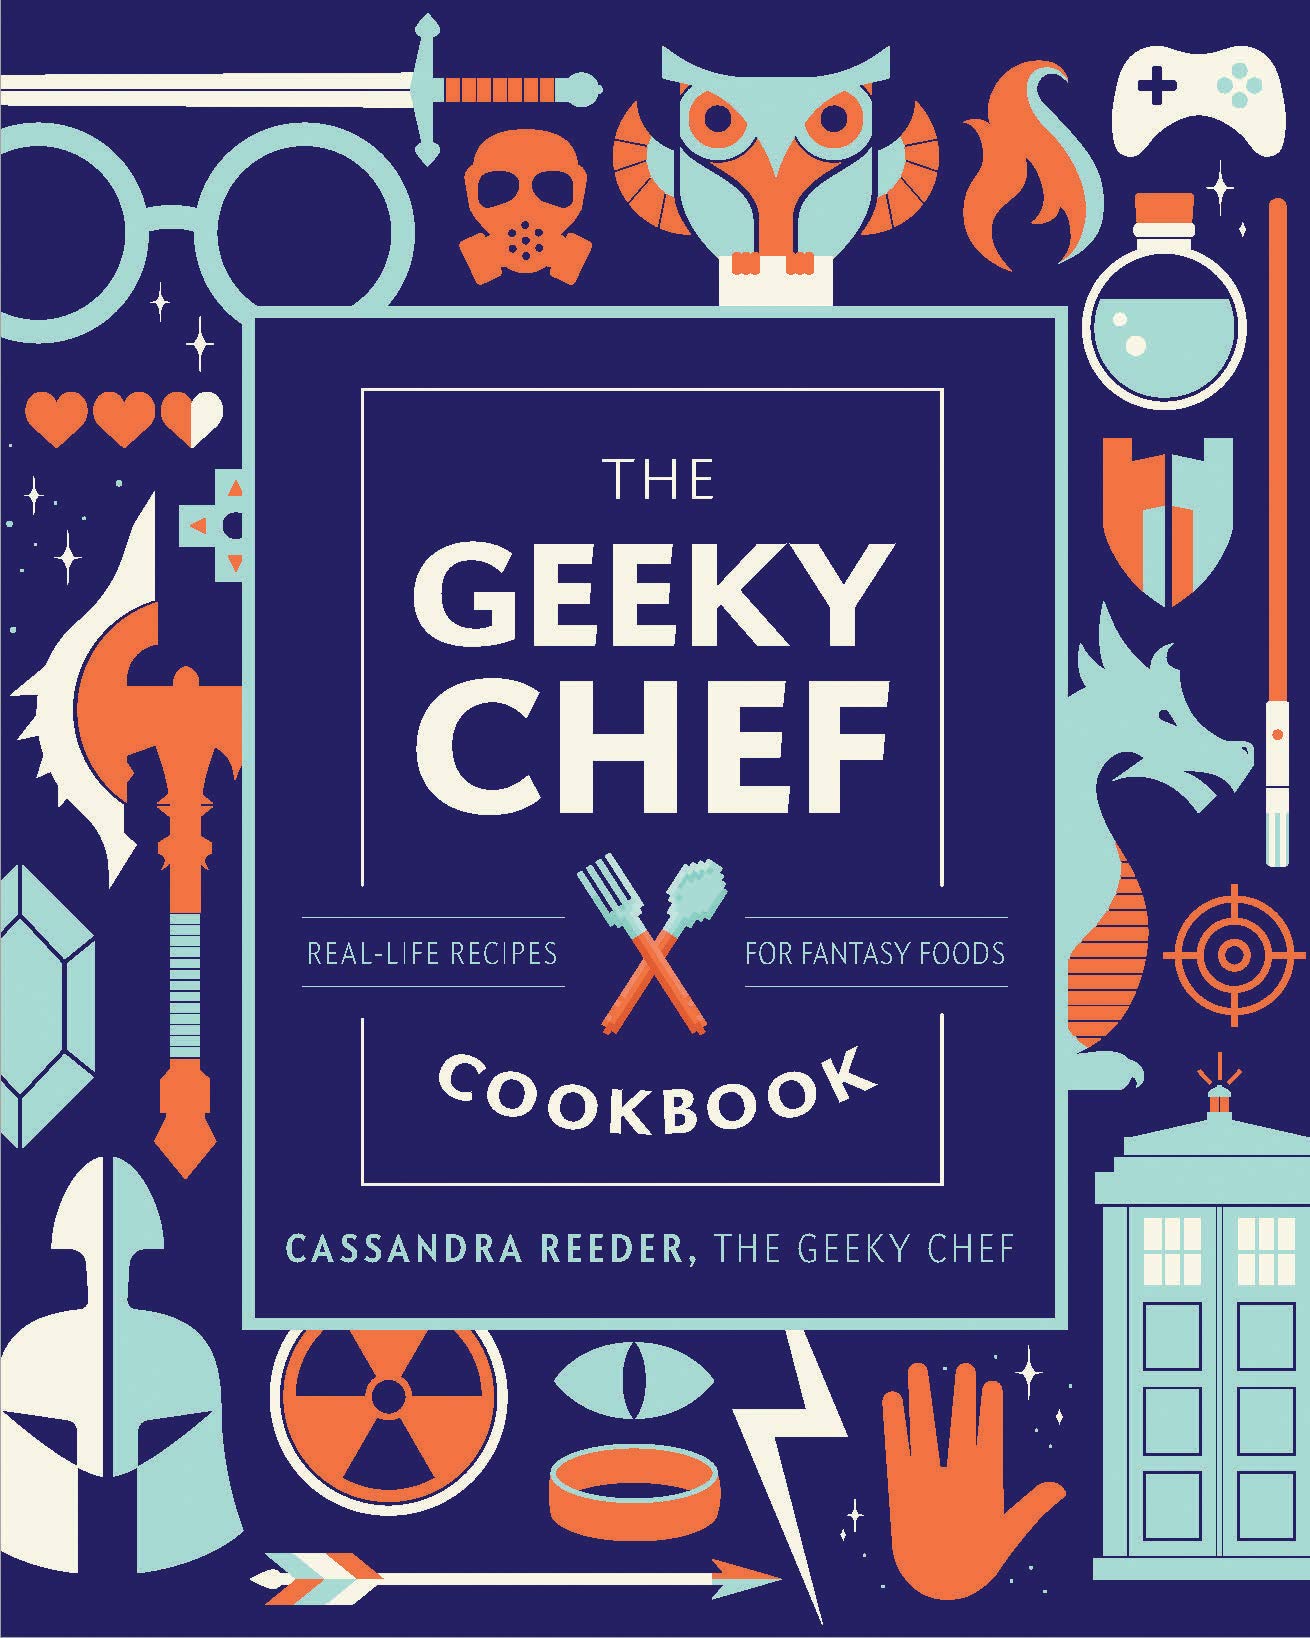 THE GEEKY CHEF COOKBOOK